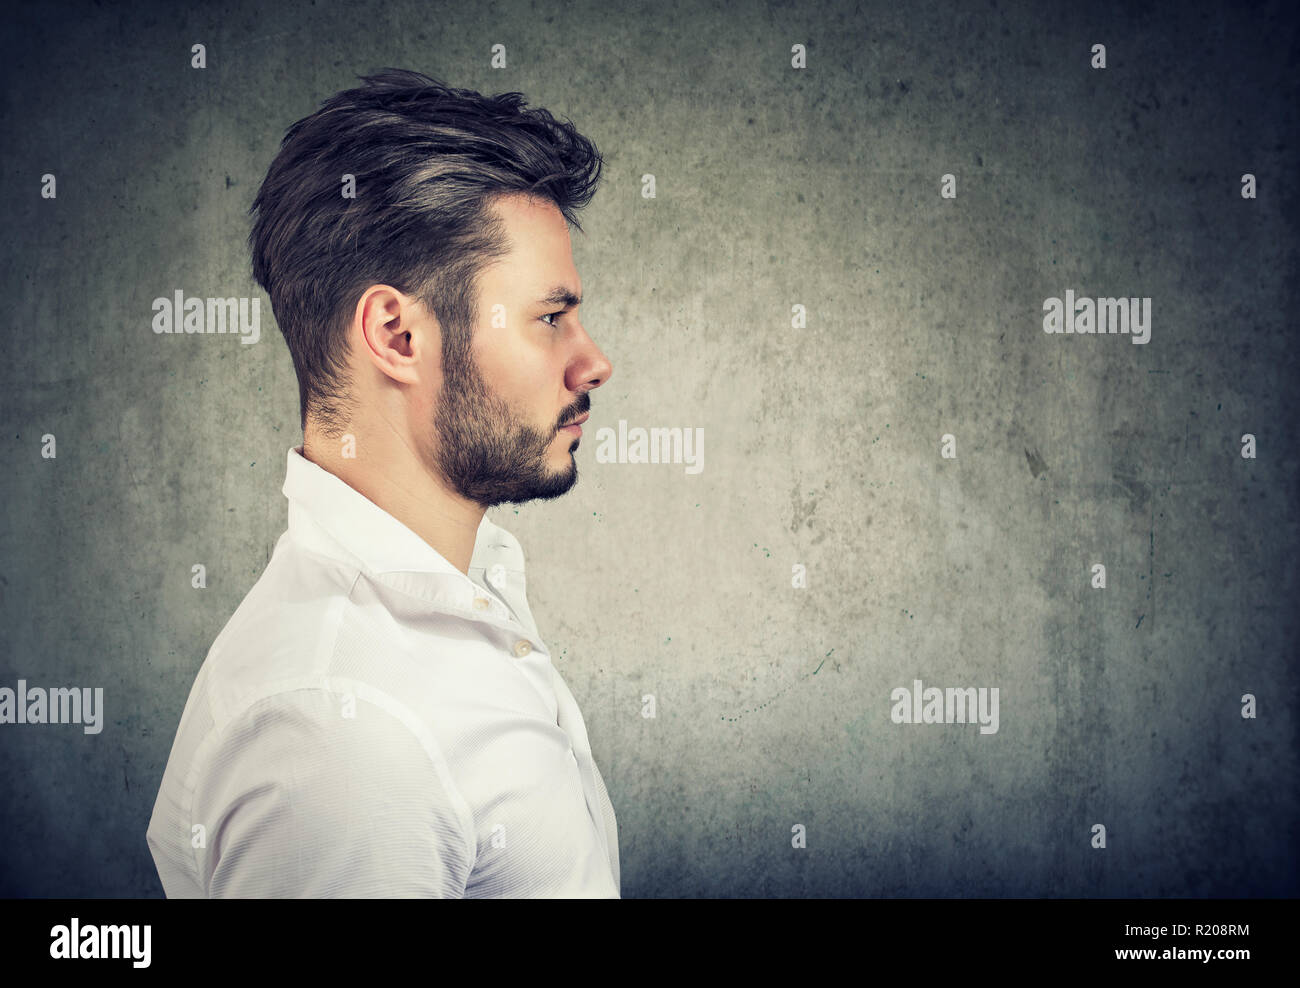 Side view of adult modern man in white shirt looking serious on gray background Stock Photo